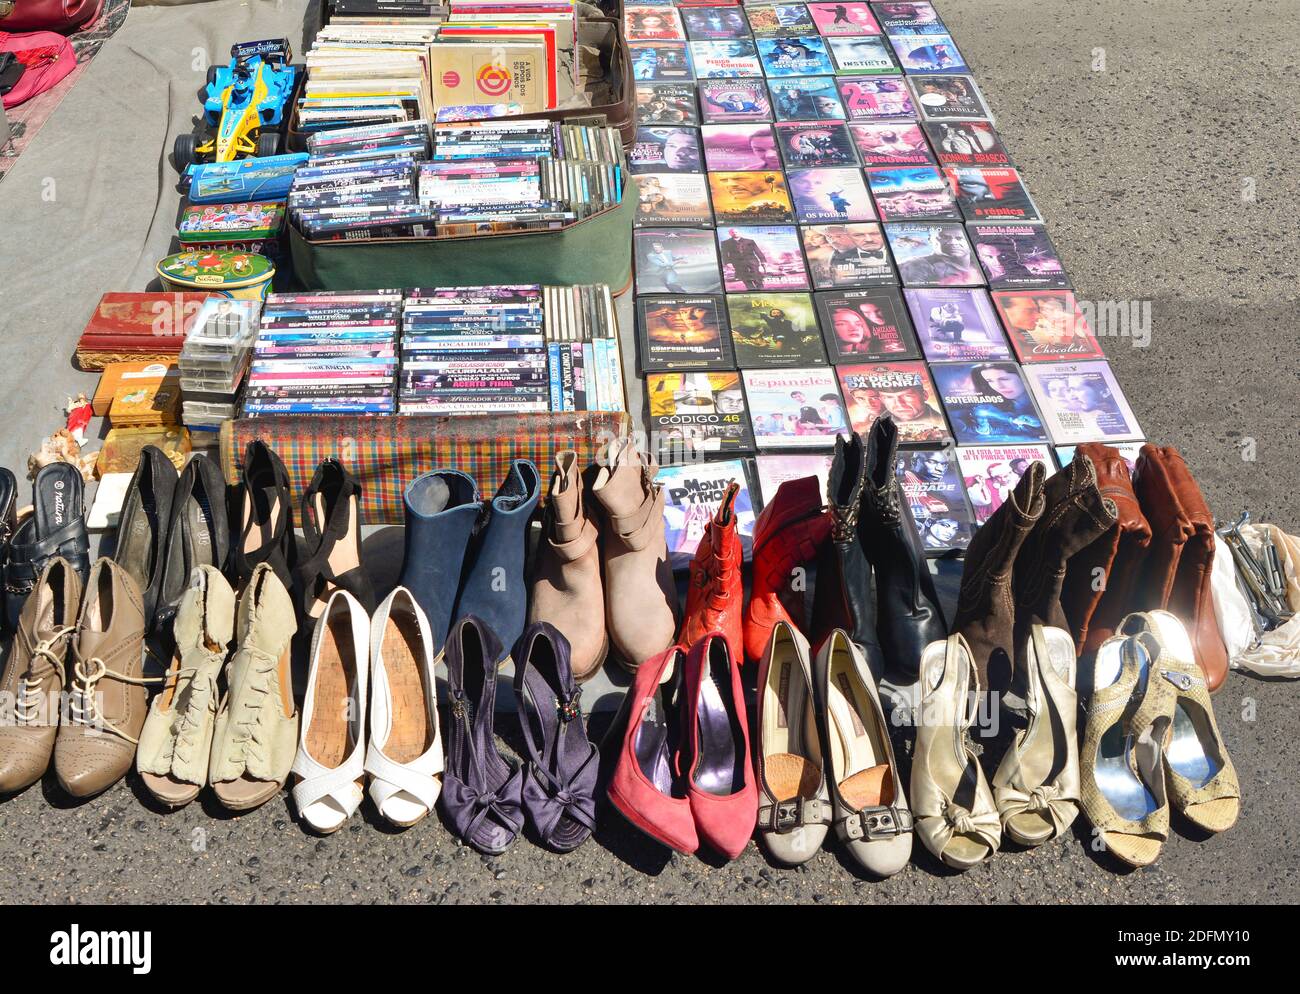 Lisbon, Portugal - August 05, 2017: DVD movie collection and heap of old used shoes of women at the flea market Stock Photo